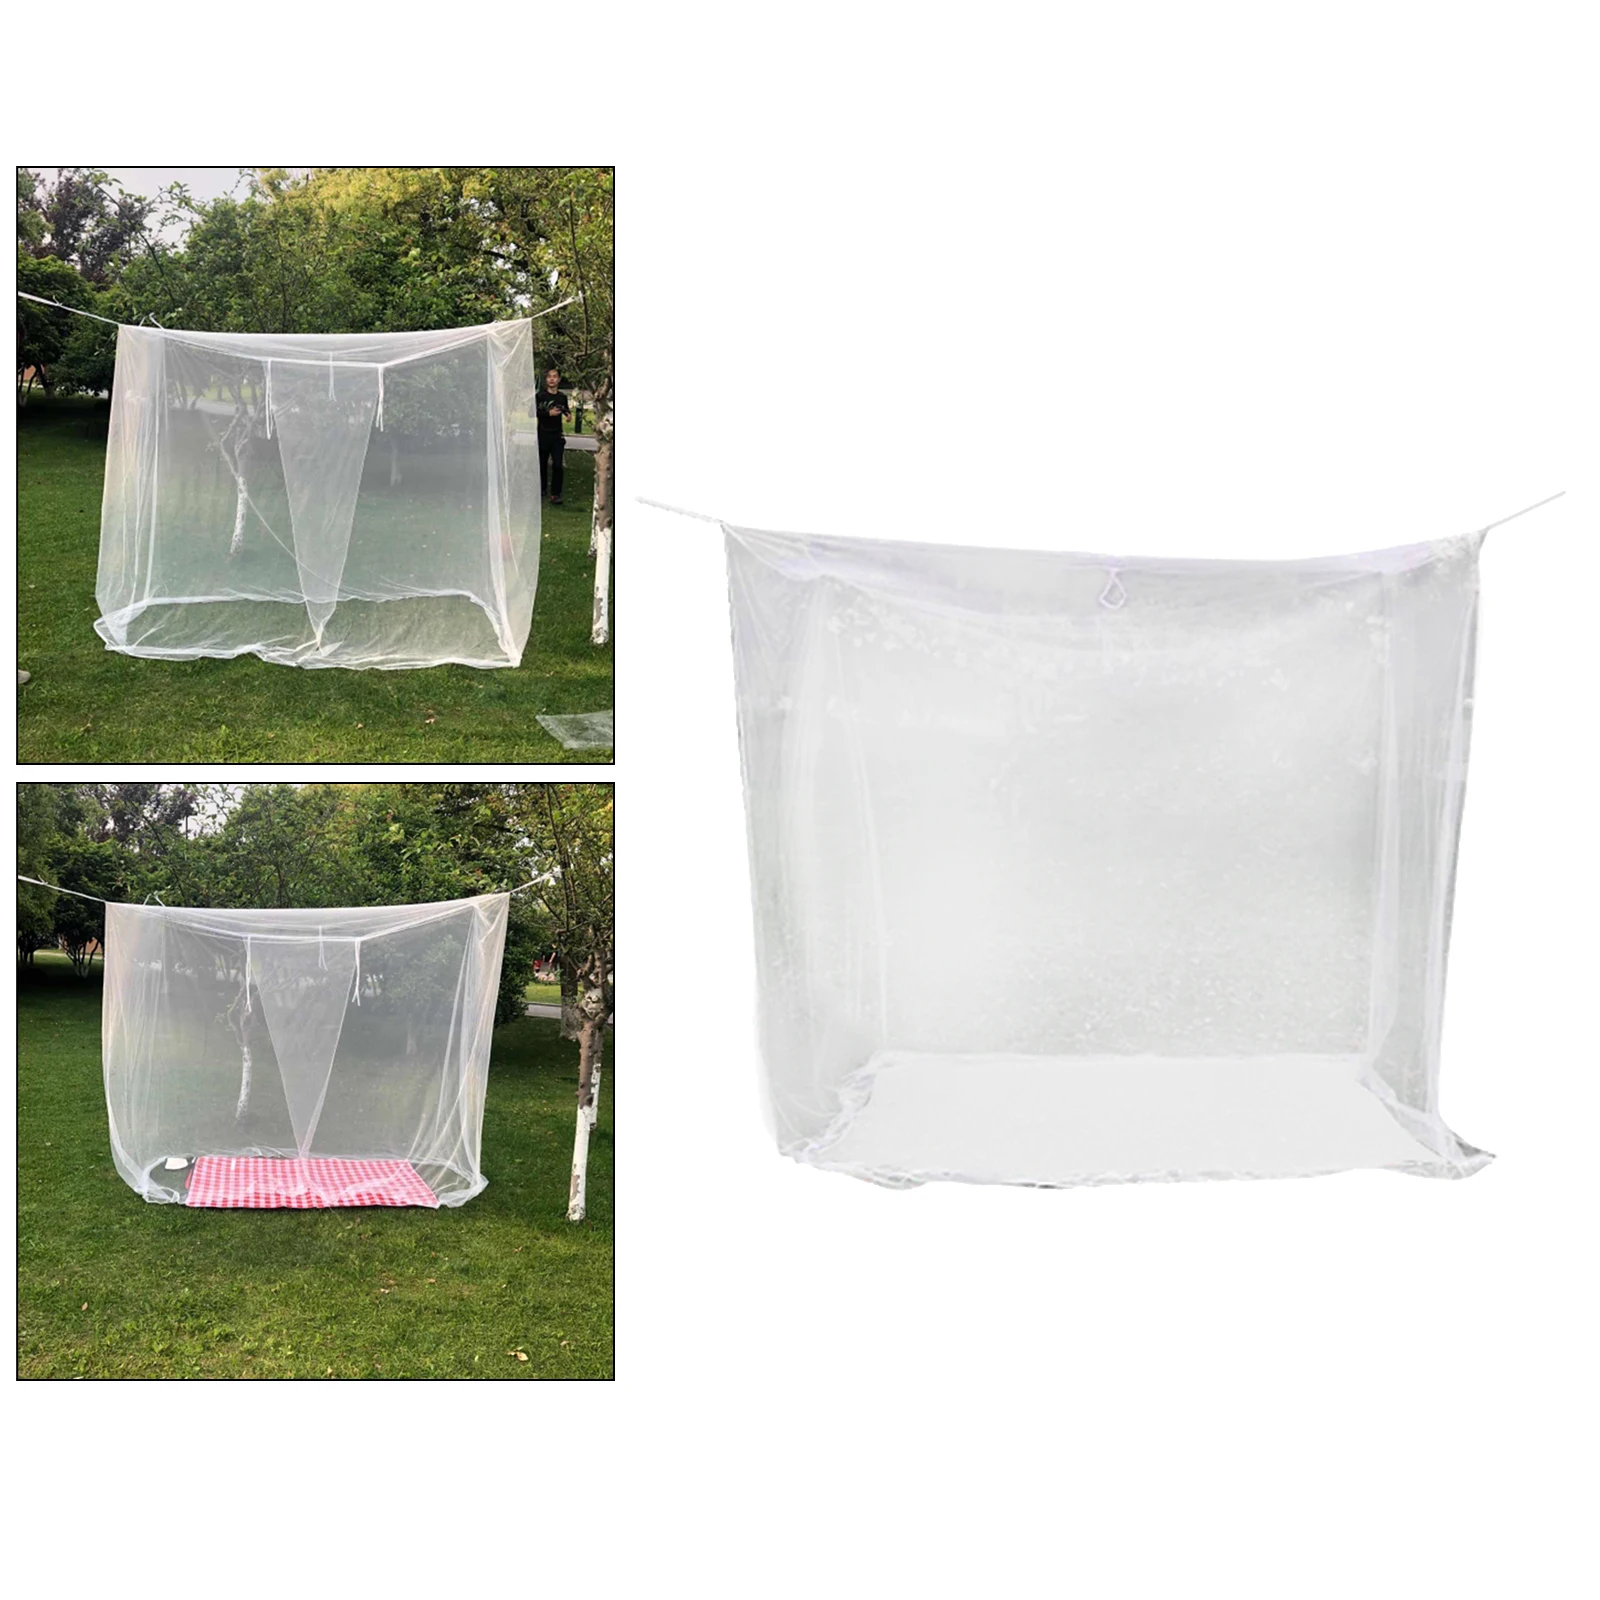 Mosquito Net White Large Outdoors Camping Netting Tent Canopy 200x200x180cm